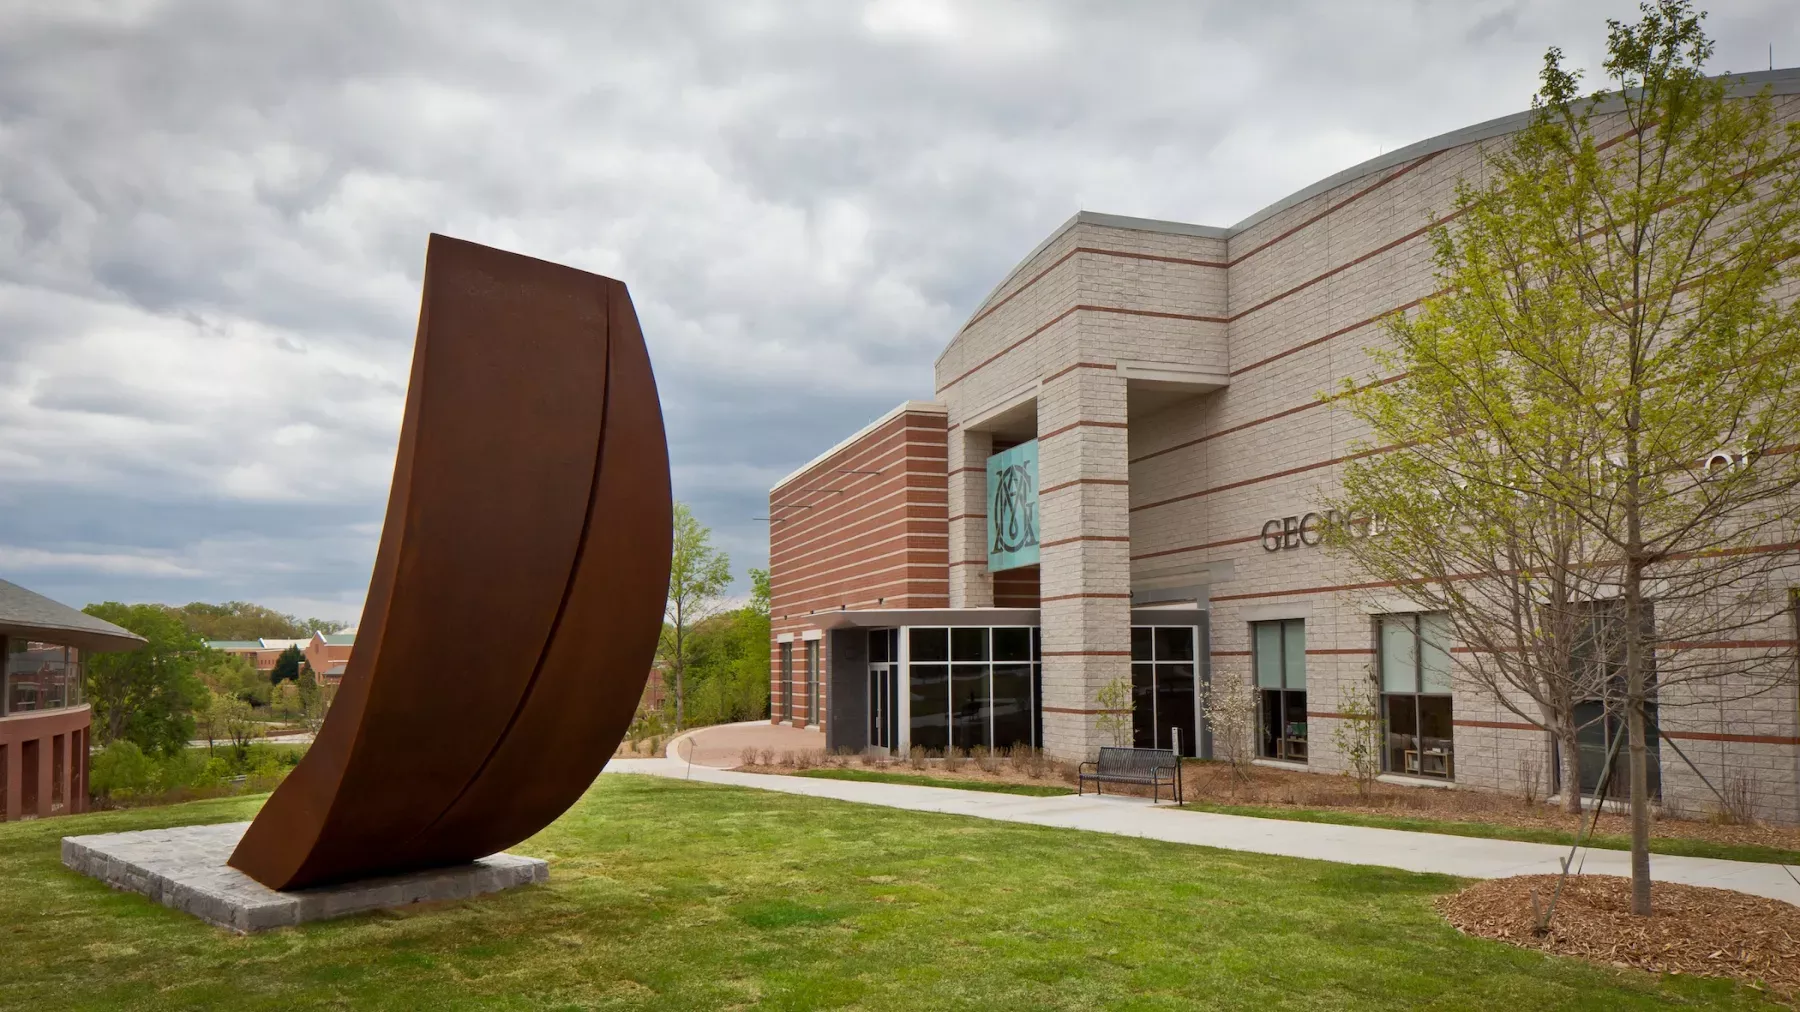 A modern building with a brick and stone facade. In front, there is a large, curved metal sculpture on a stone base. Nearby, there are trees with budding green leaves. The sky is overcast with gray clouds.